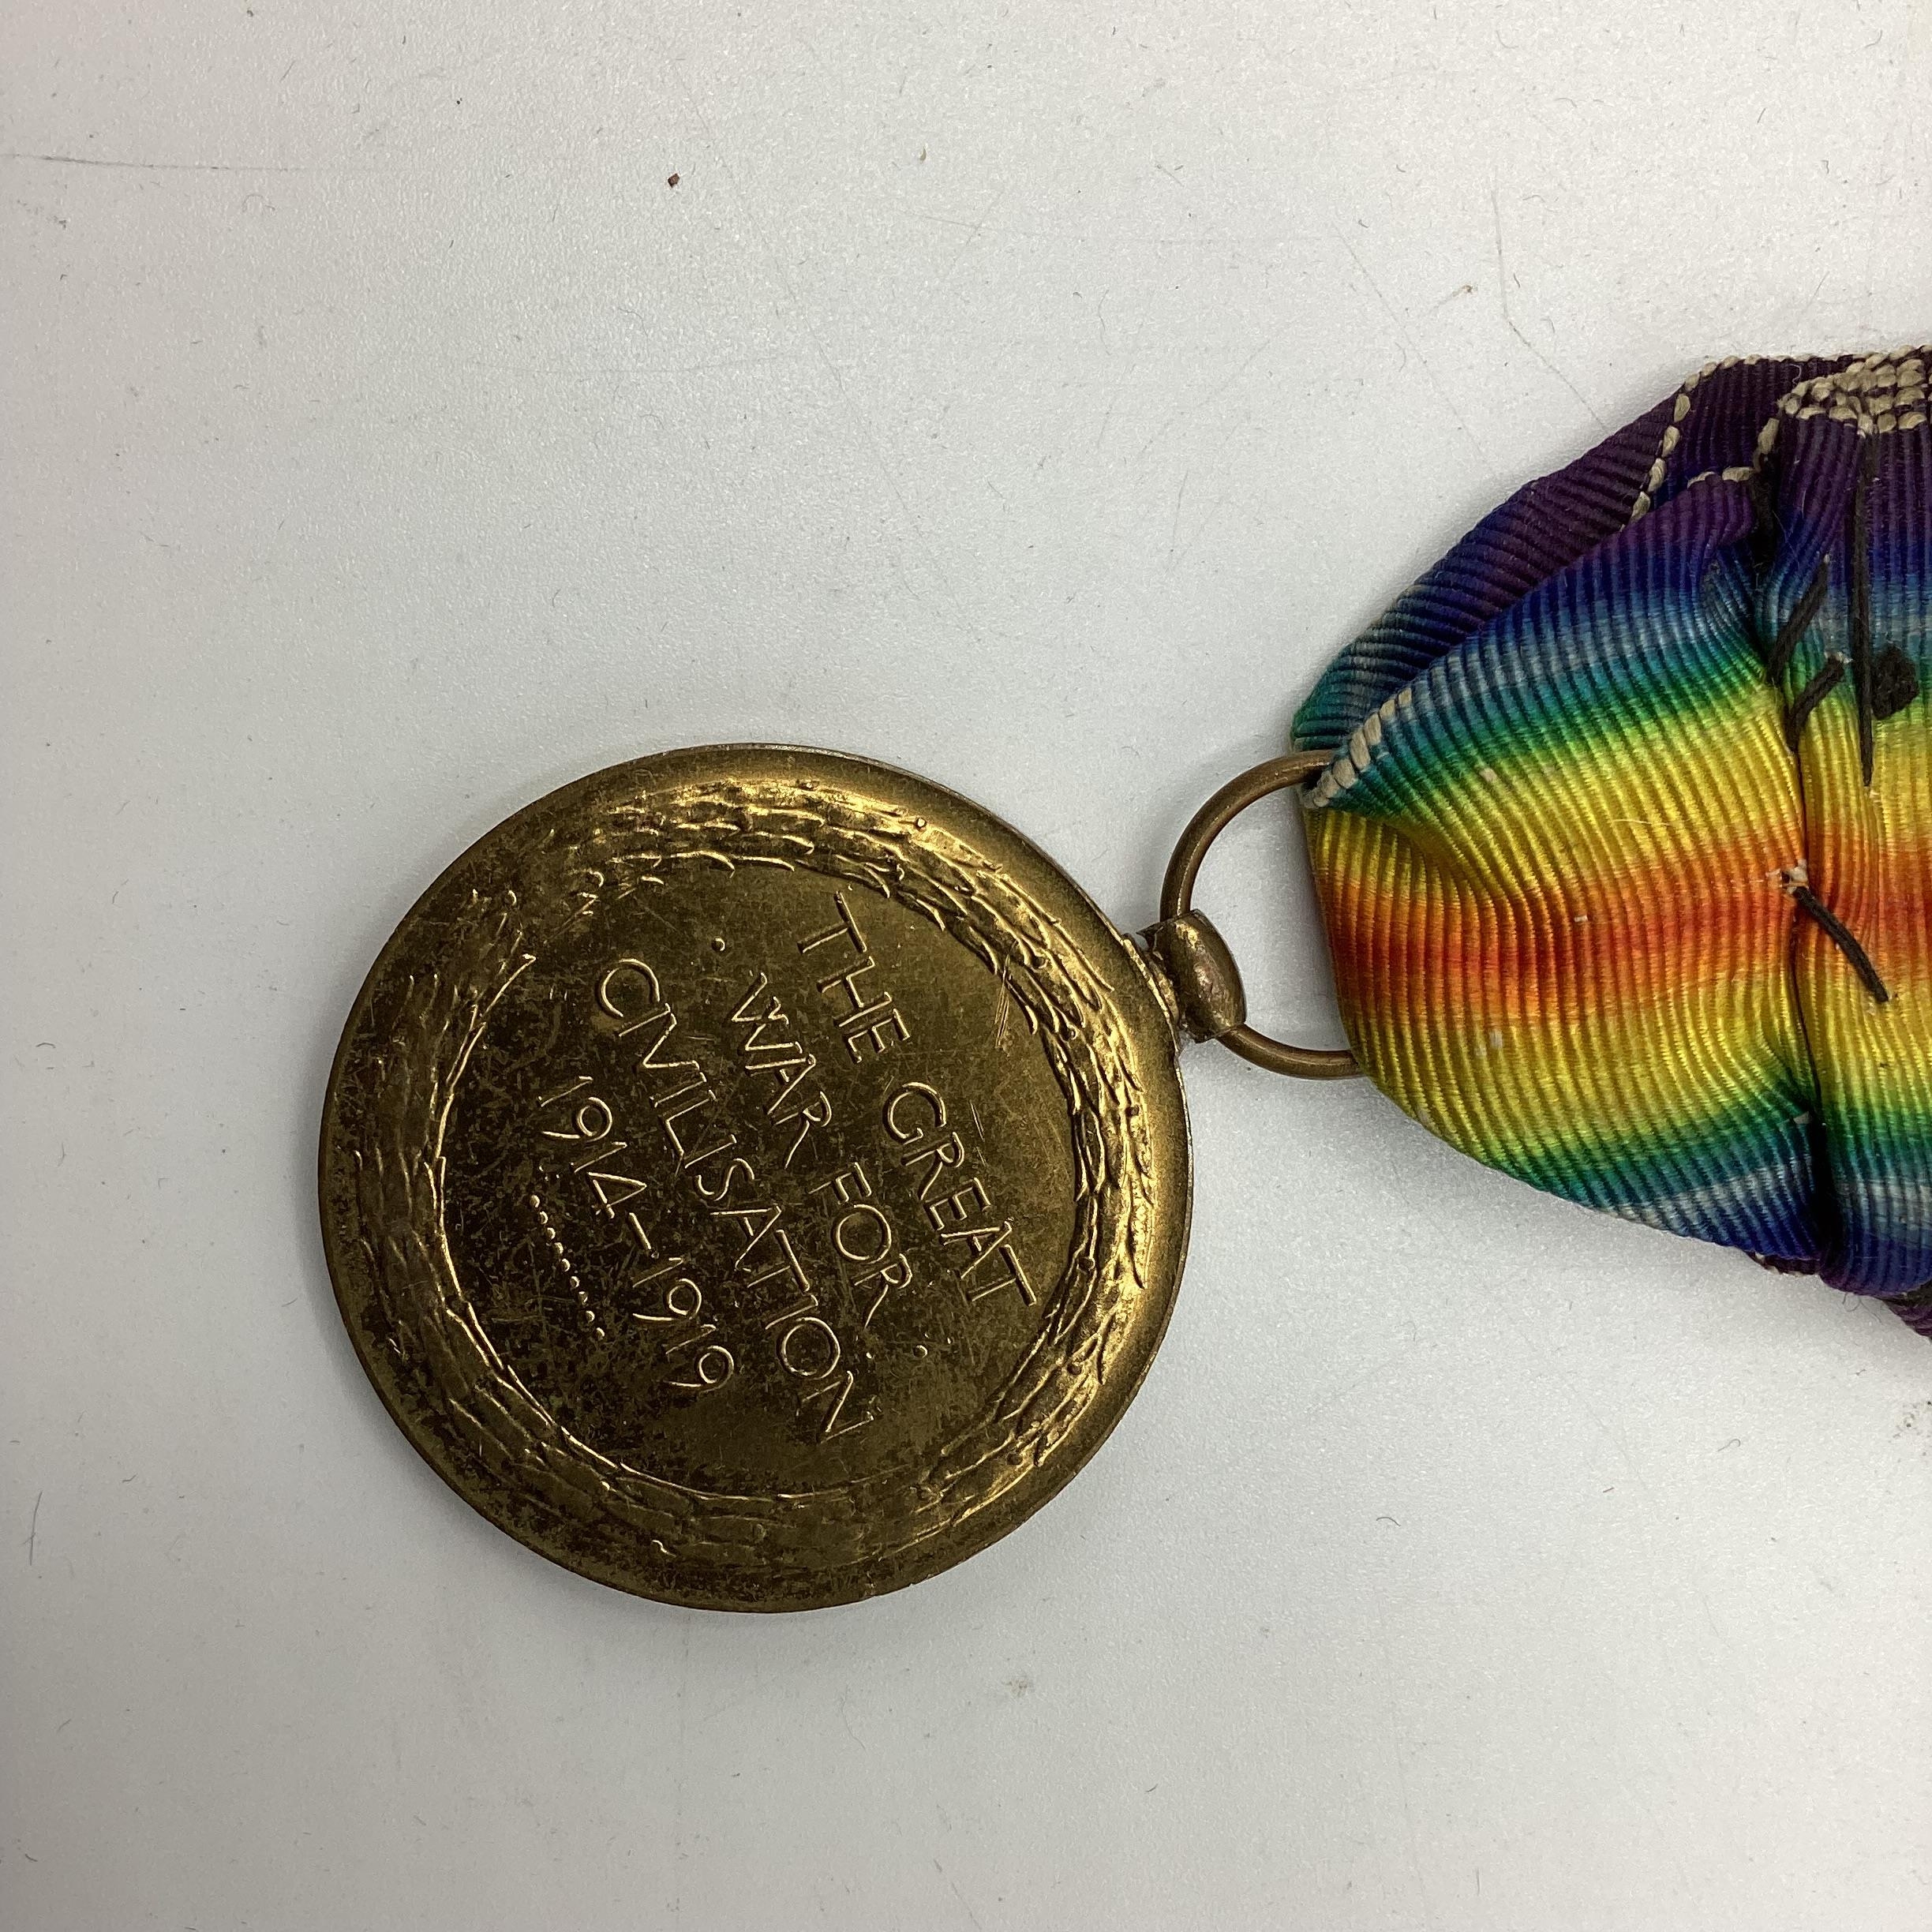 A World War I trio of medals to PNR M.Whale Royal Engineers together with medal group 'General - Image 6 of 7